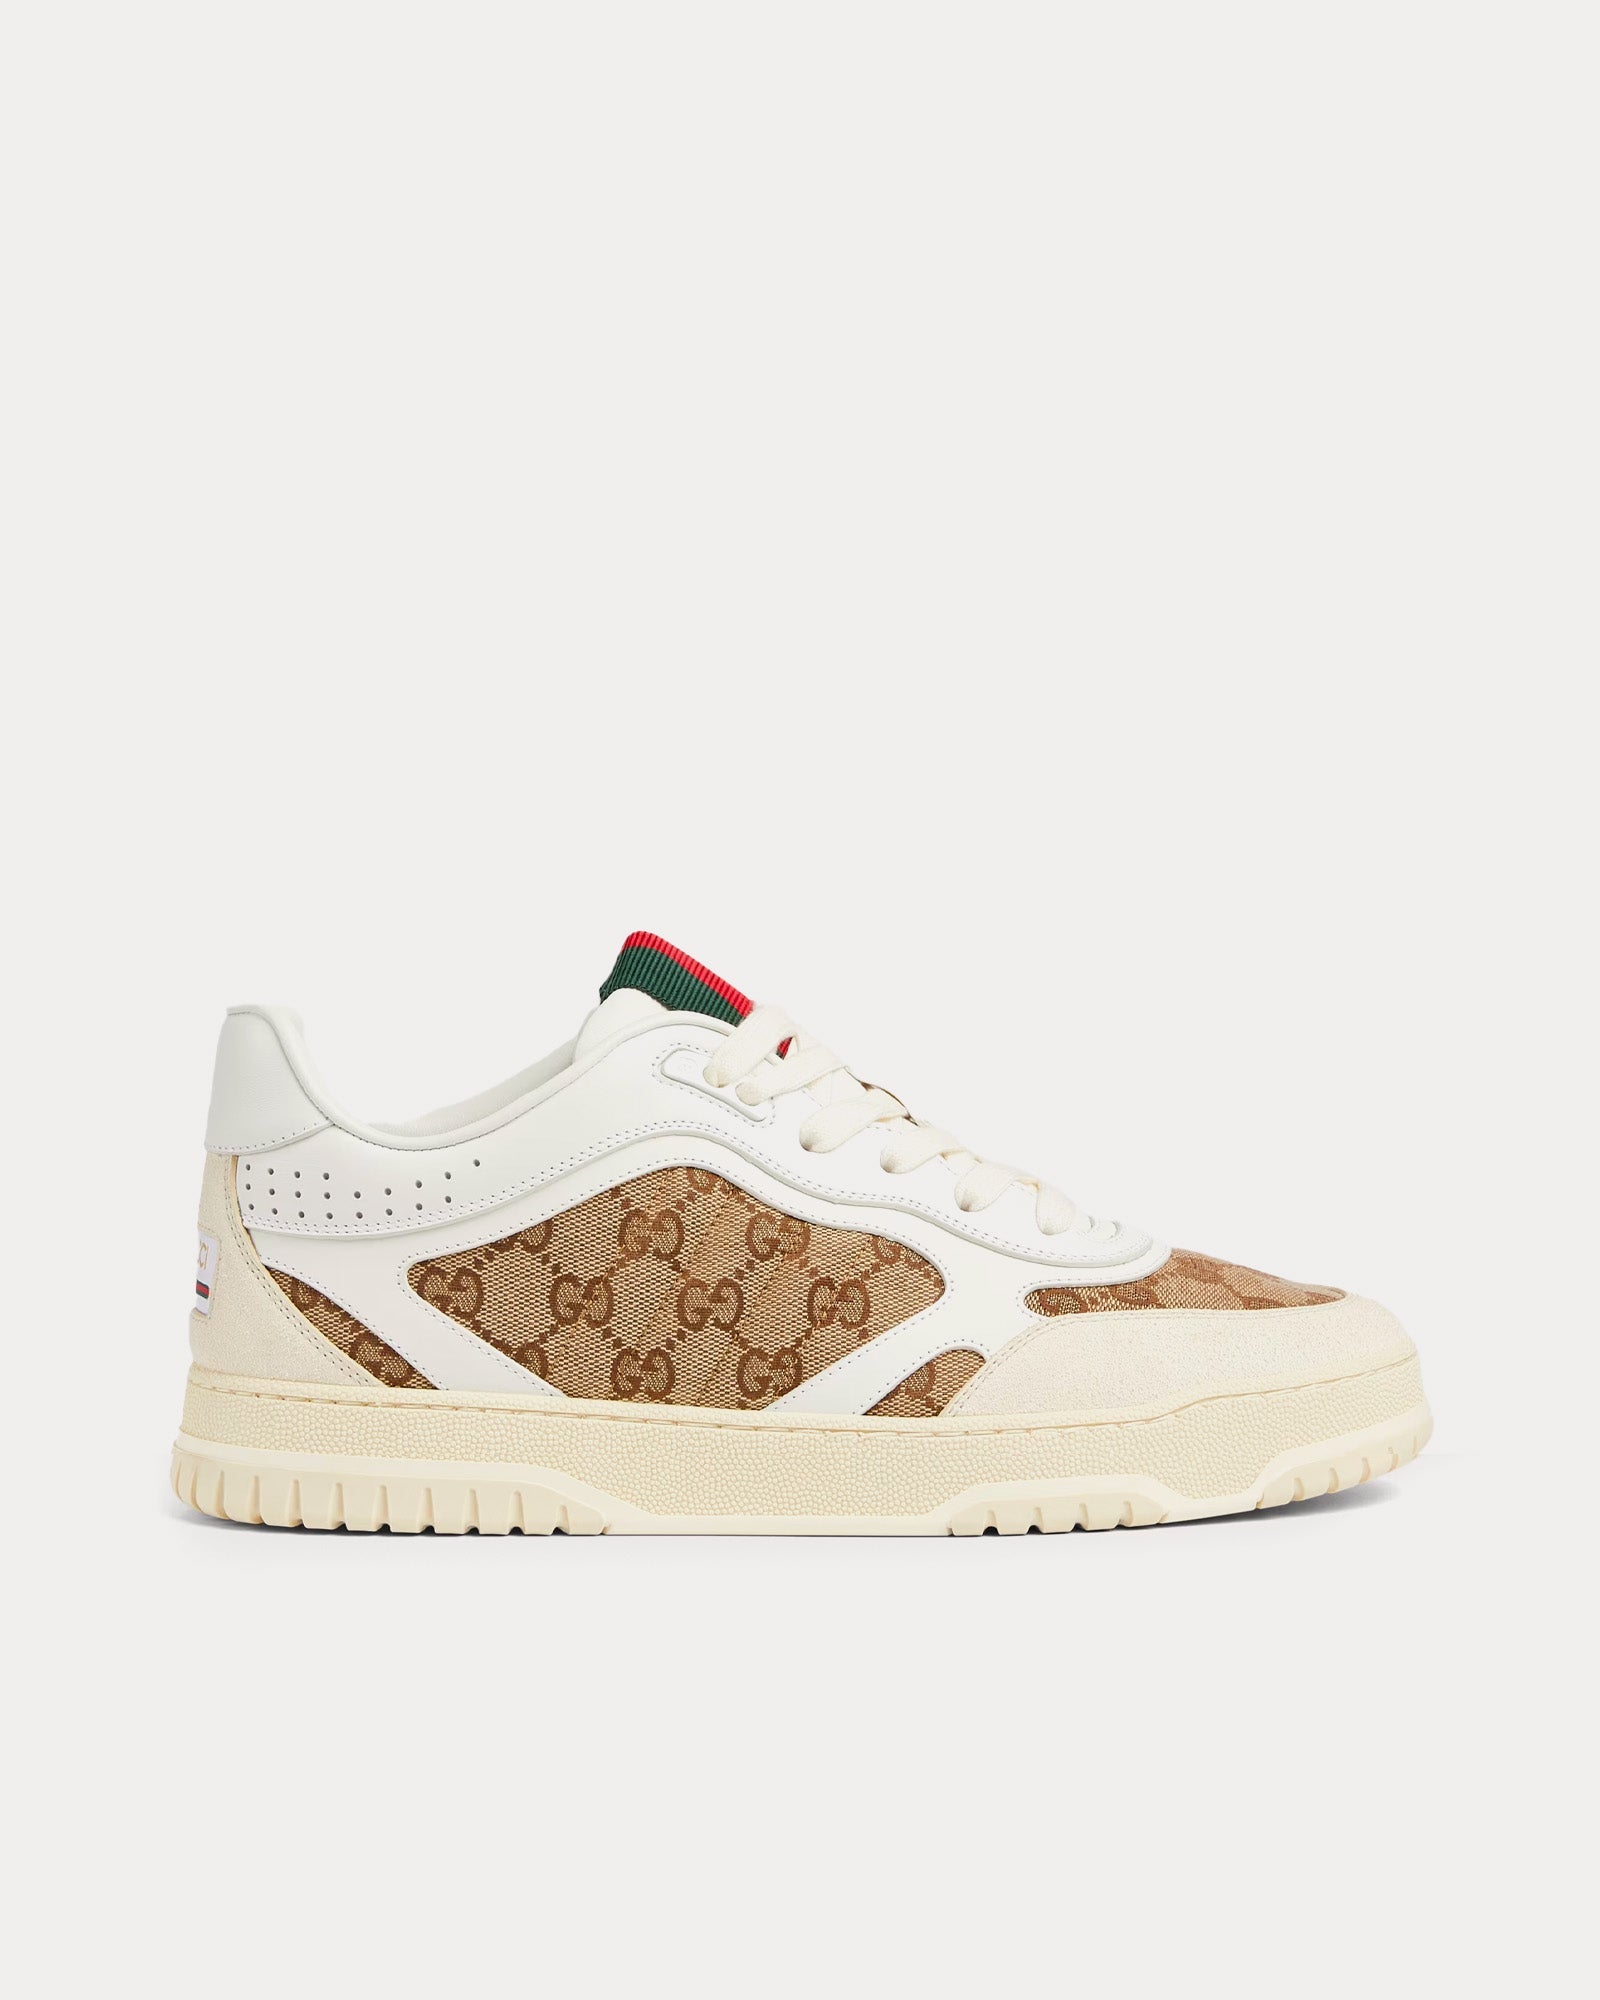 Gucci - Re-Web Leather with Original GG Canvas White Low Top Sneakers